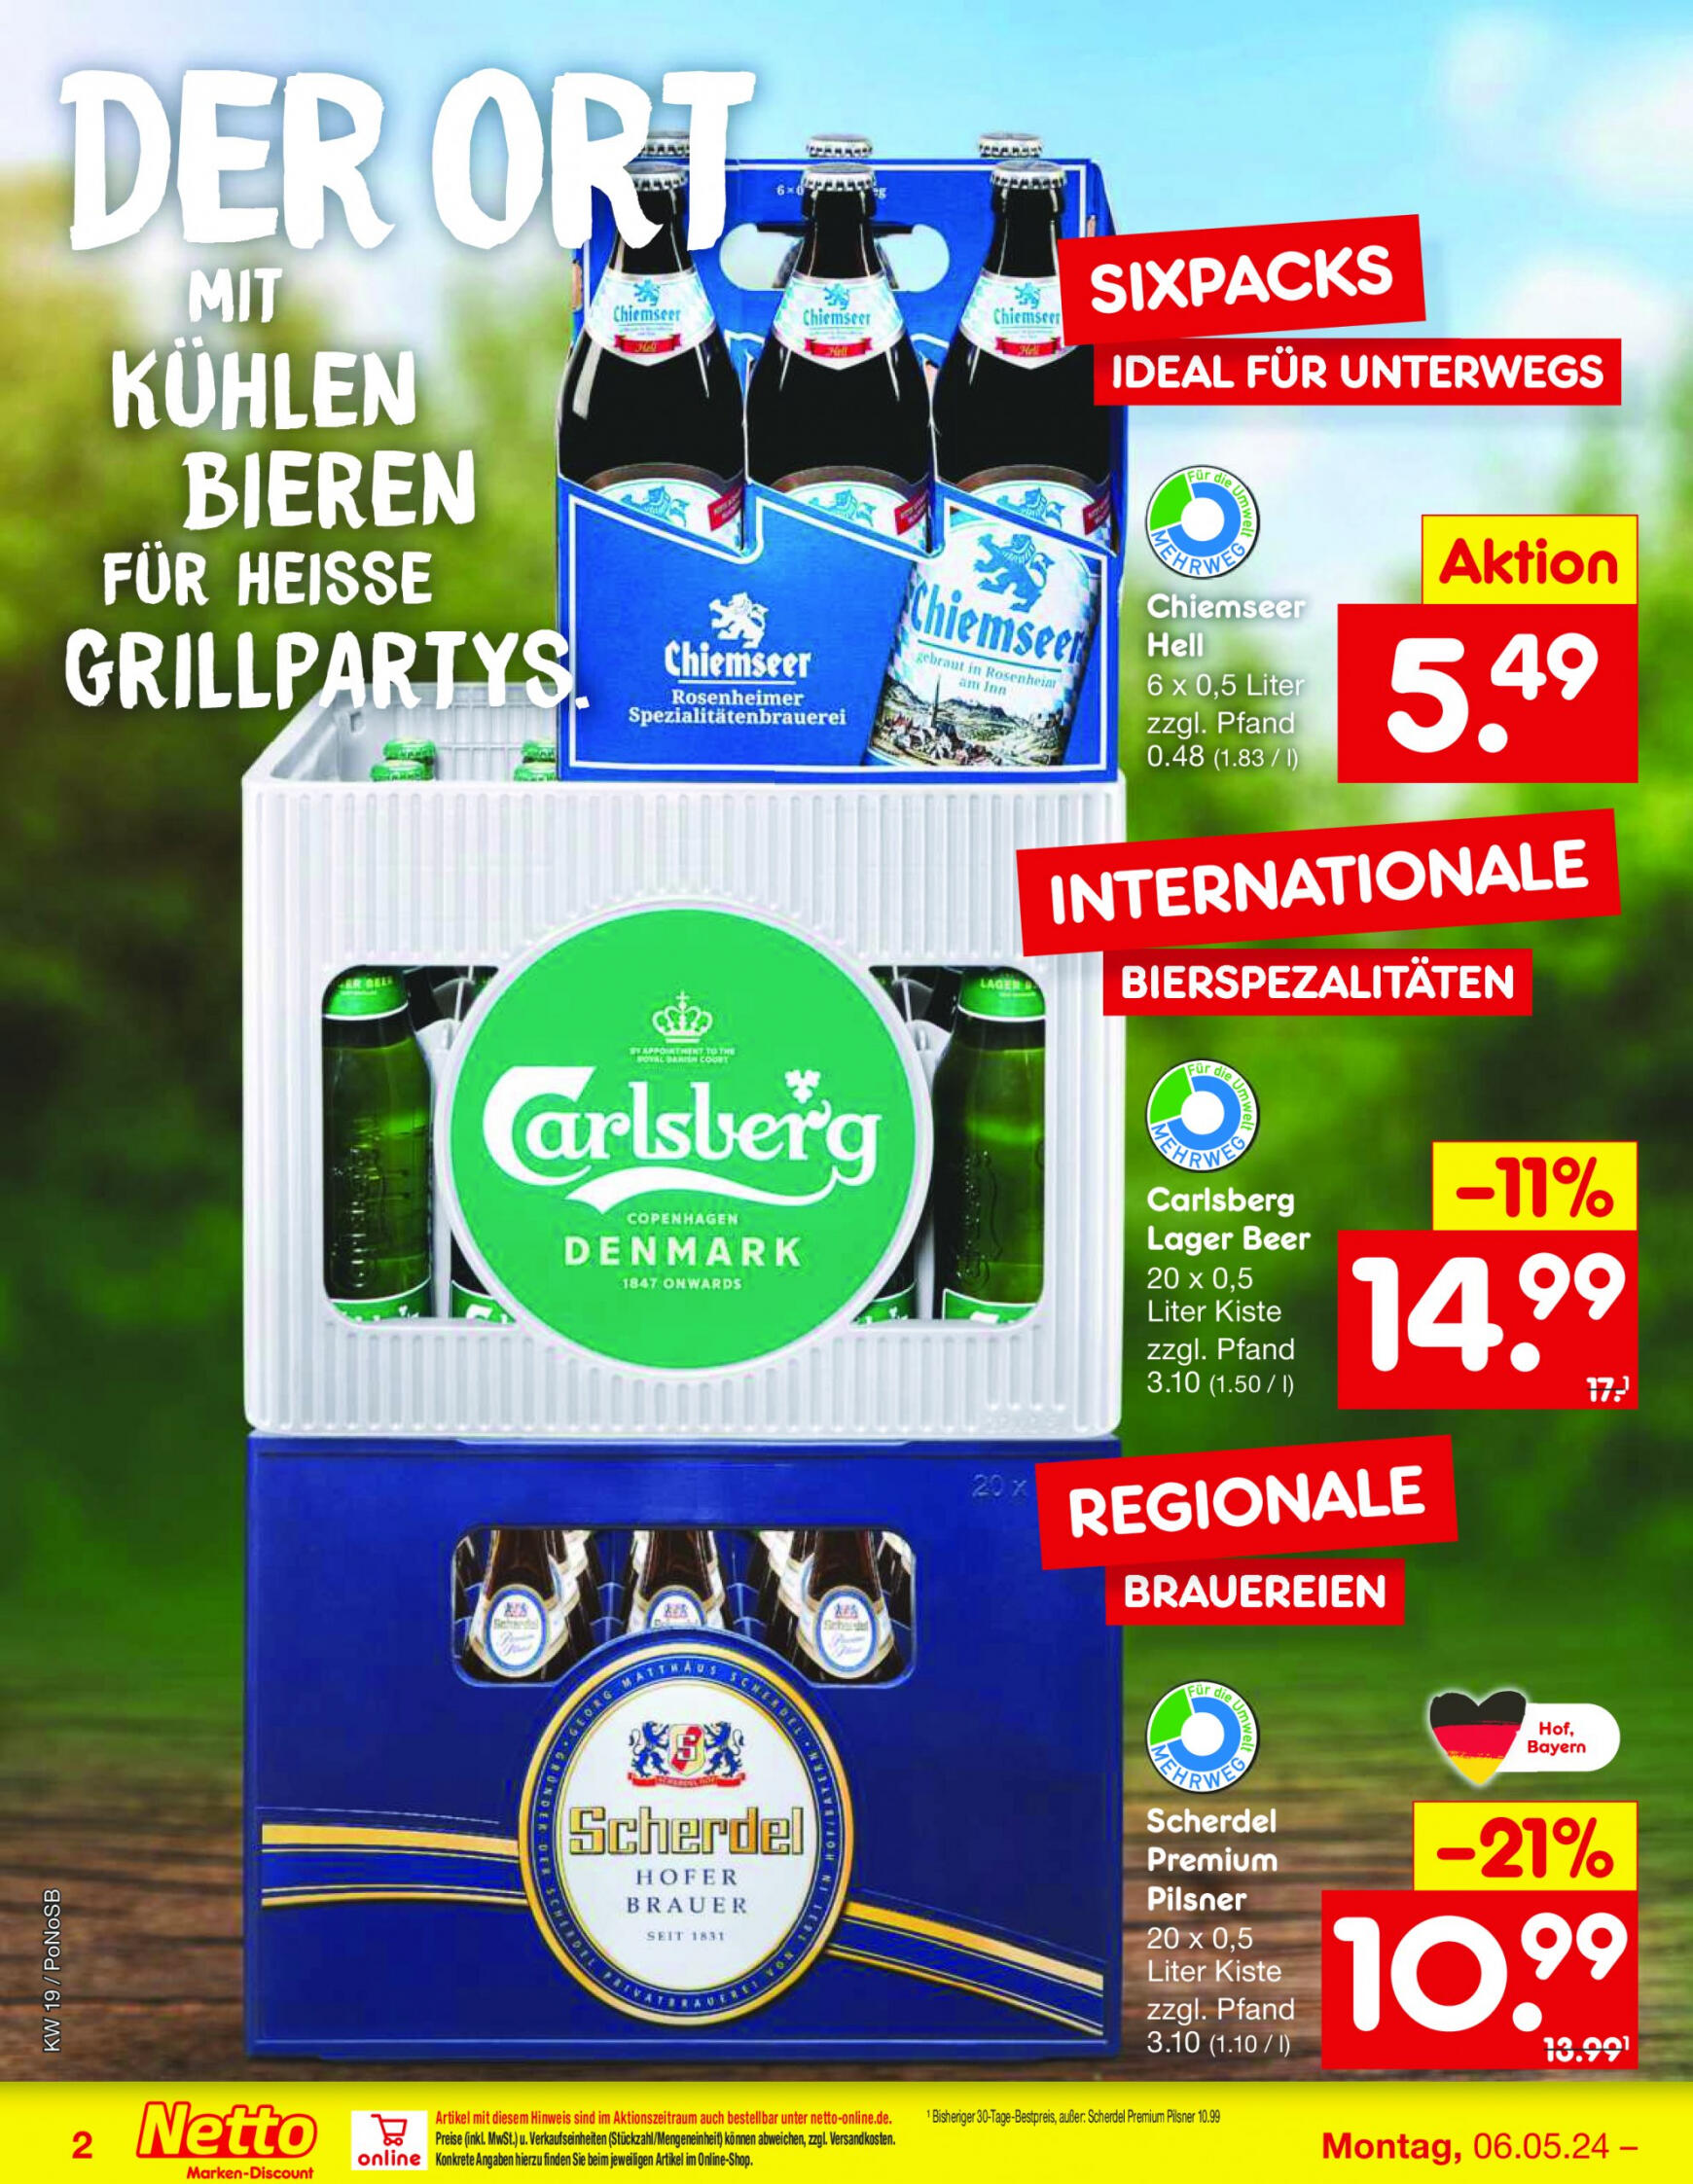 netto - Flyer Netto aktuell 06.05. - 11.05. - page: 20